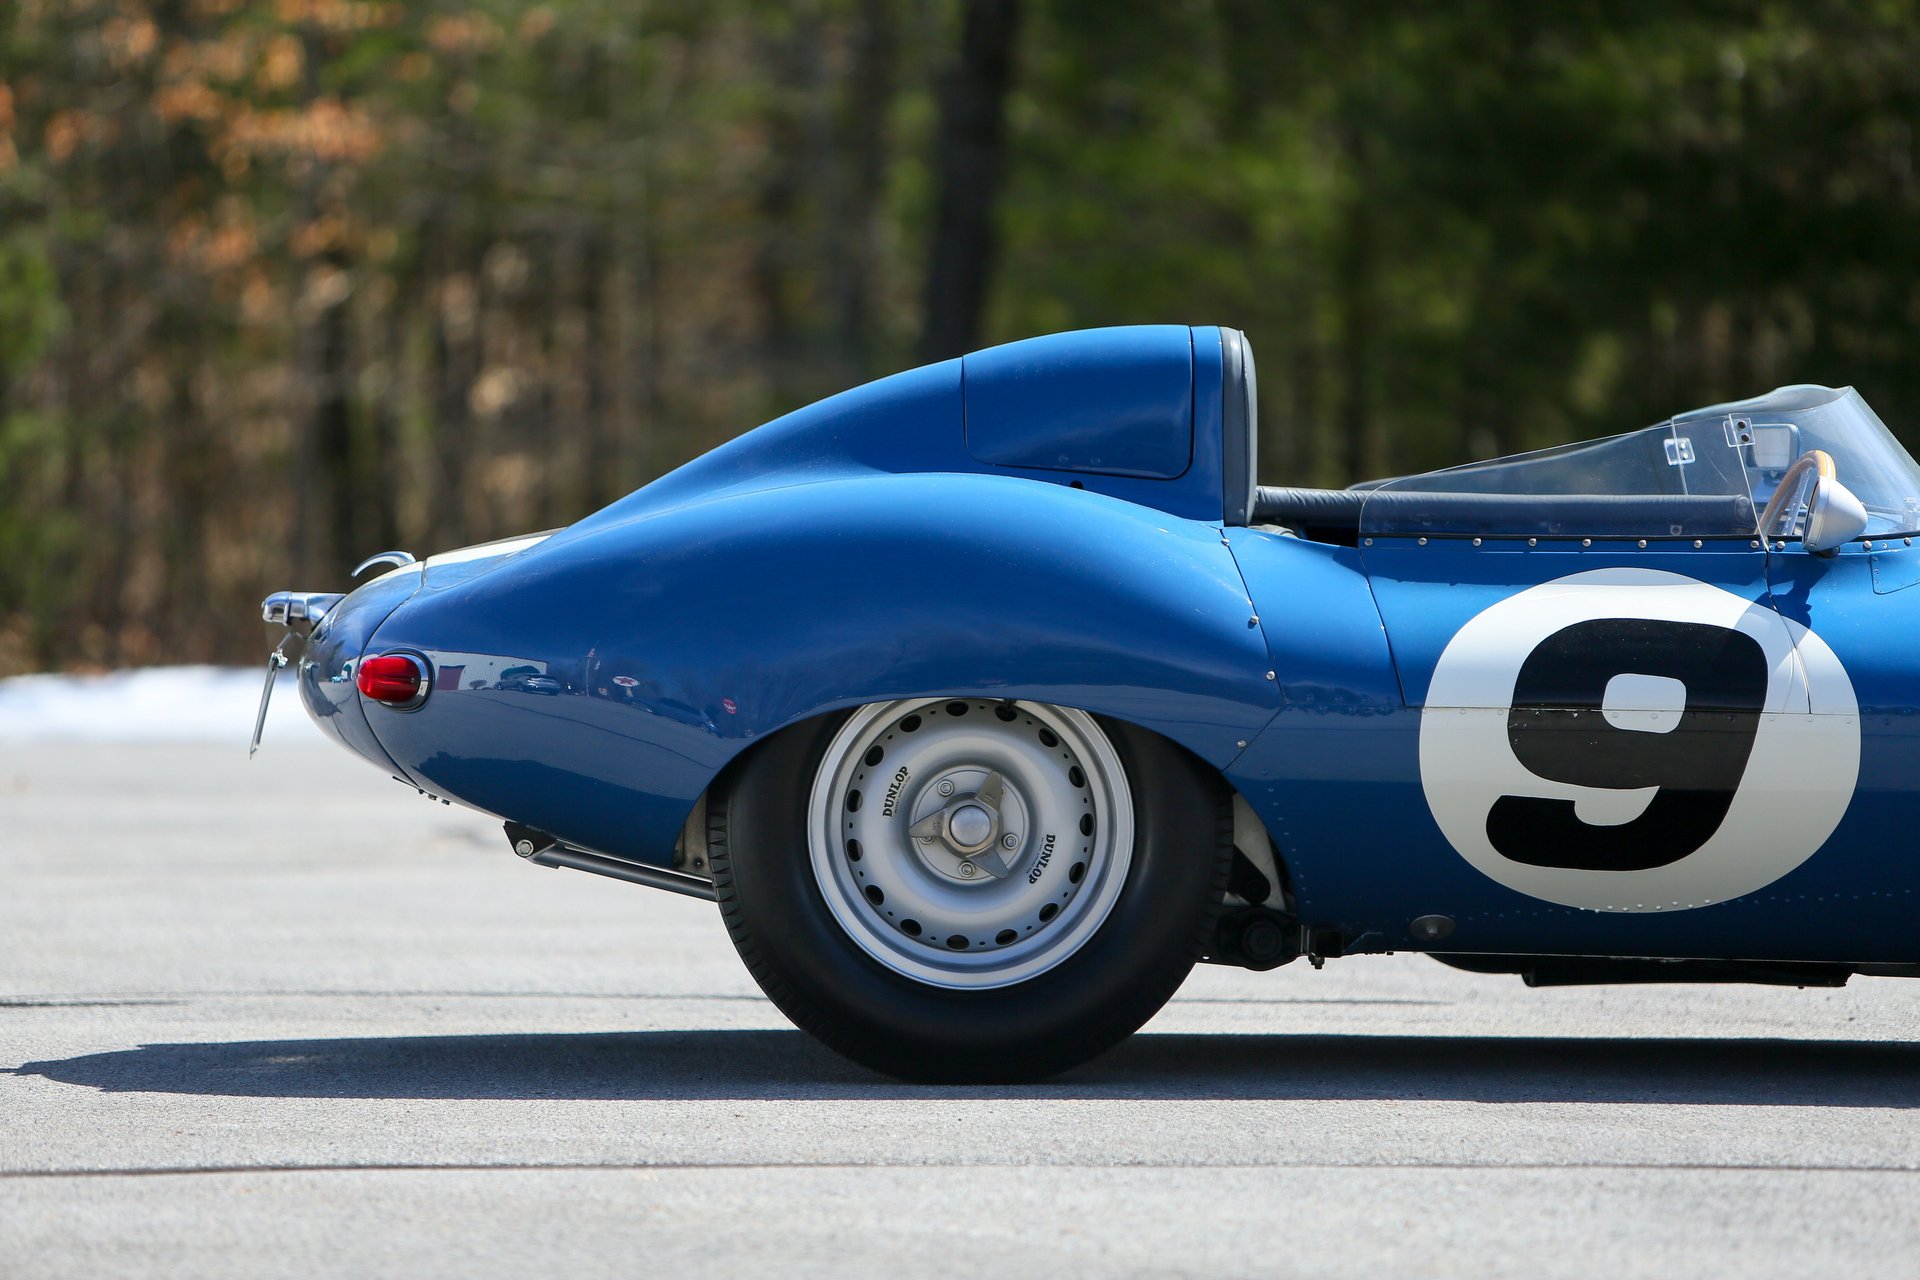 1955 Jaguar D-Type  Passion for the Drive: The Cars of Jim Taylor